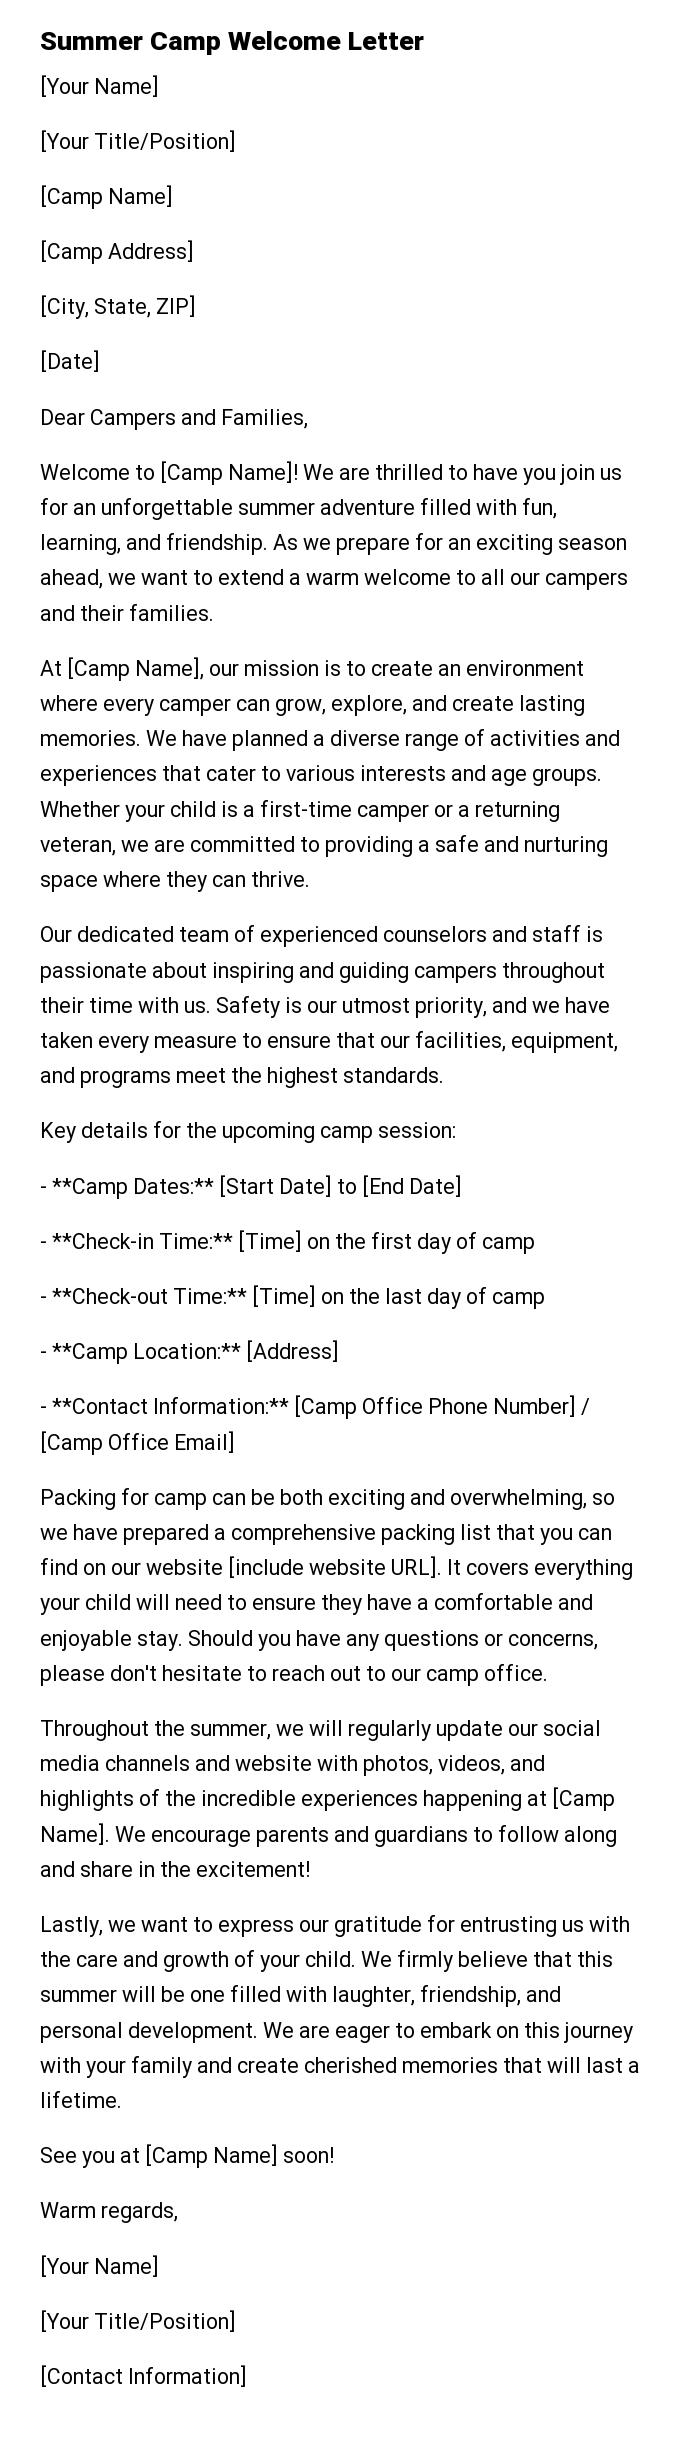 Summer Camp Welcome Letter